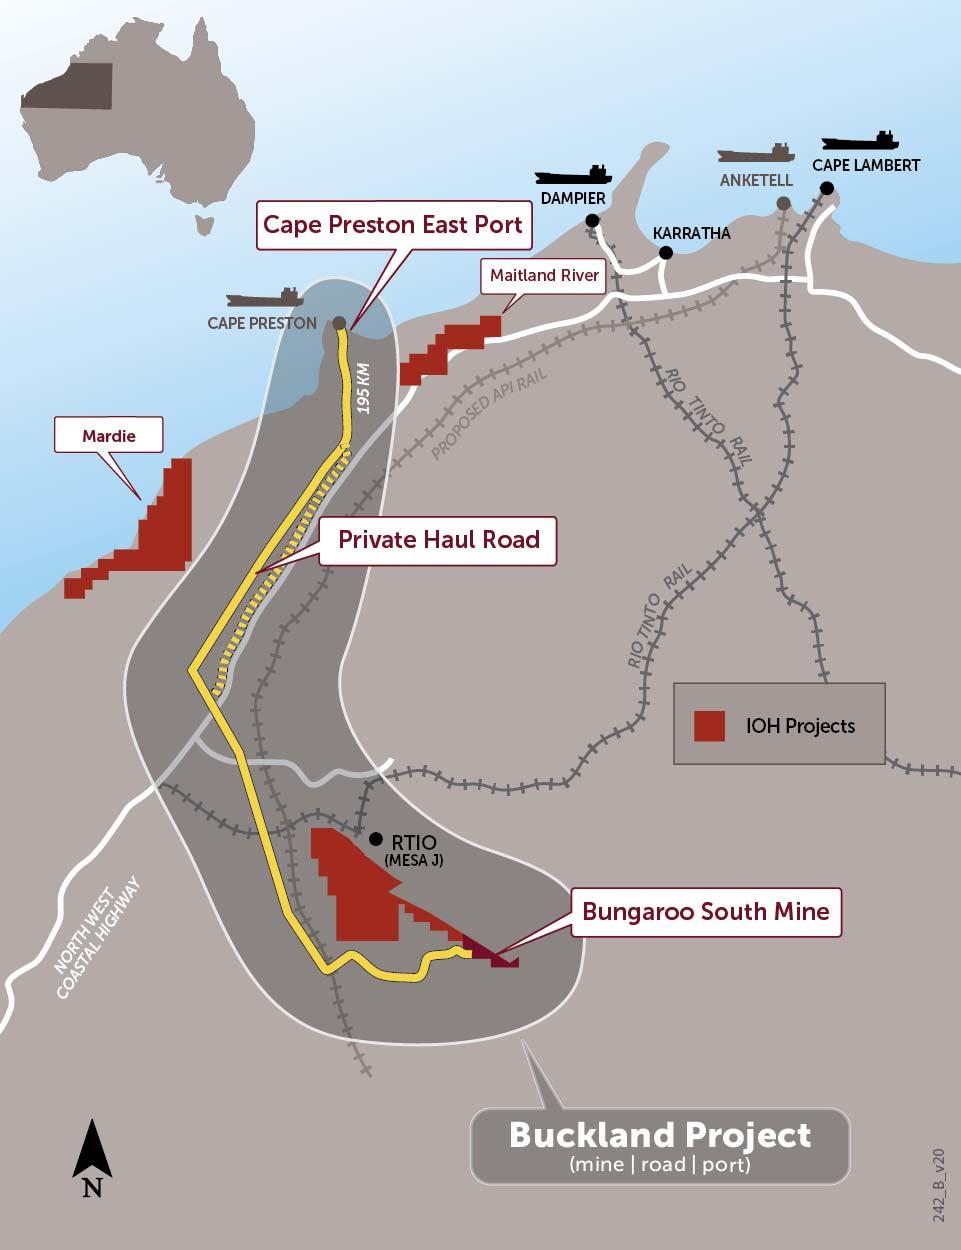 Buckland Project Bungaroo South Mine + Haul Roads + Cape Preston East Port Positive PFS completed DFS underway with target completion date by Sep 2013 Commenced discussion with potential project